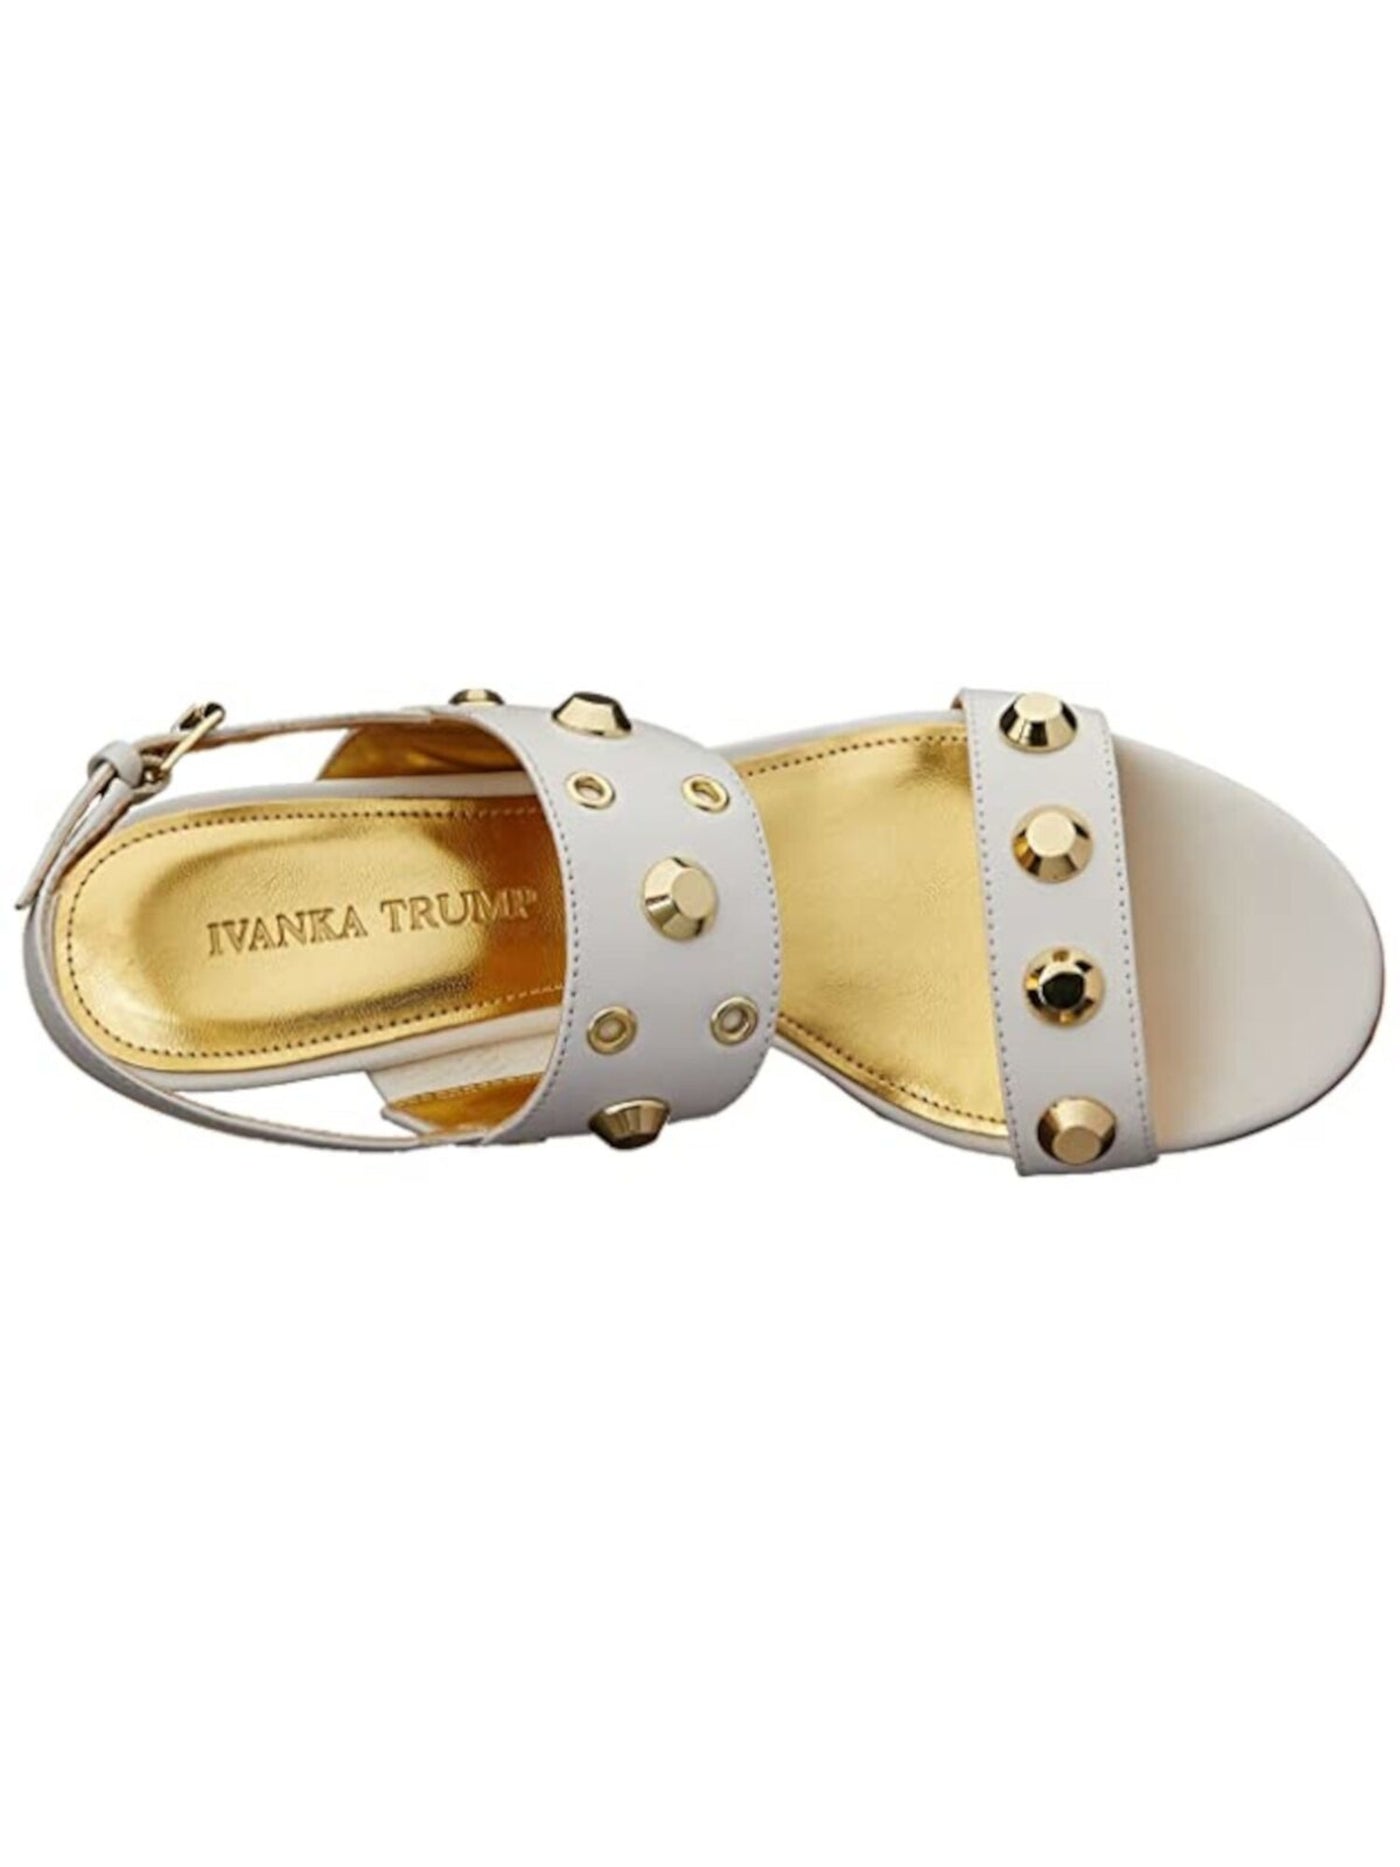 IVANKA TRUMP Womens White Gold-Tone Grommet And Studs Cork Lined 1 1/2" Platform Adjustable Strap Padded Gitty Round Toe Wedge Buckle Leather Sandals Shoes 8 M